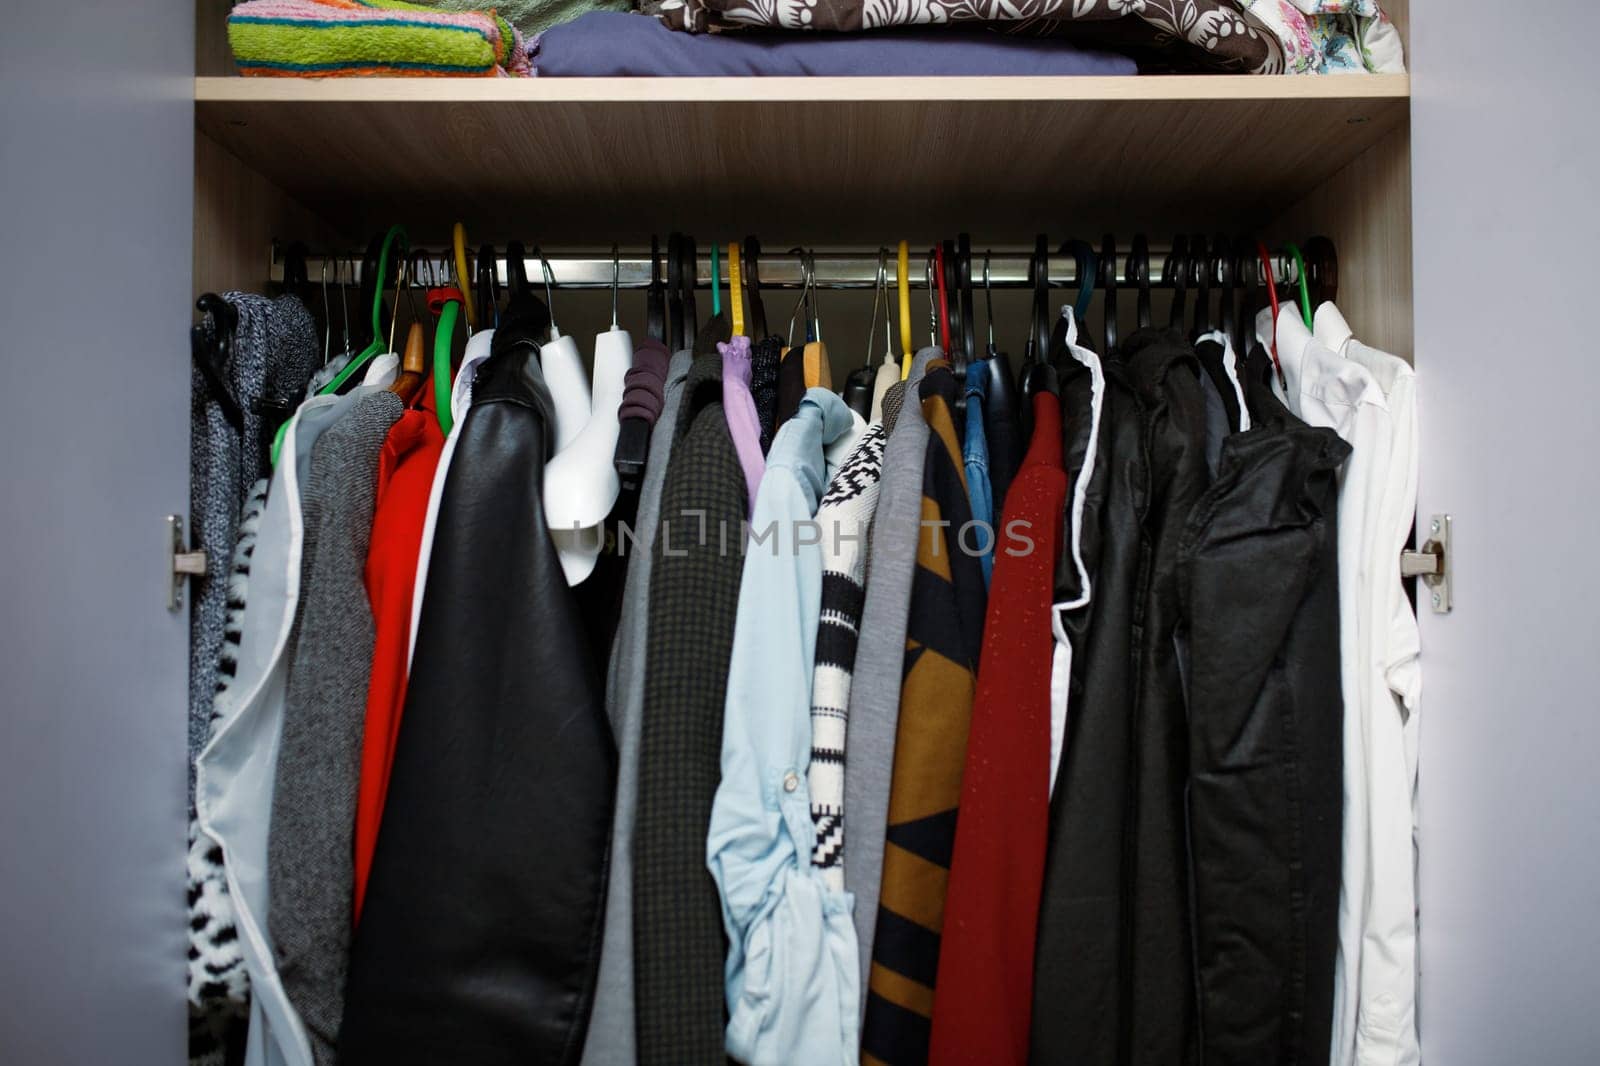 Open closet with a variety of clothes hanging randomly on hangers.